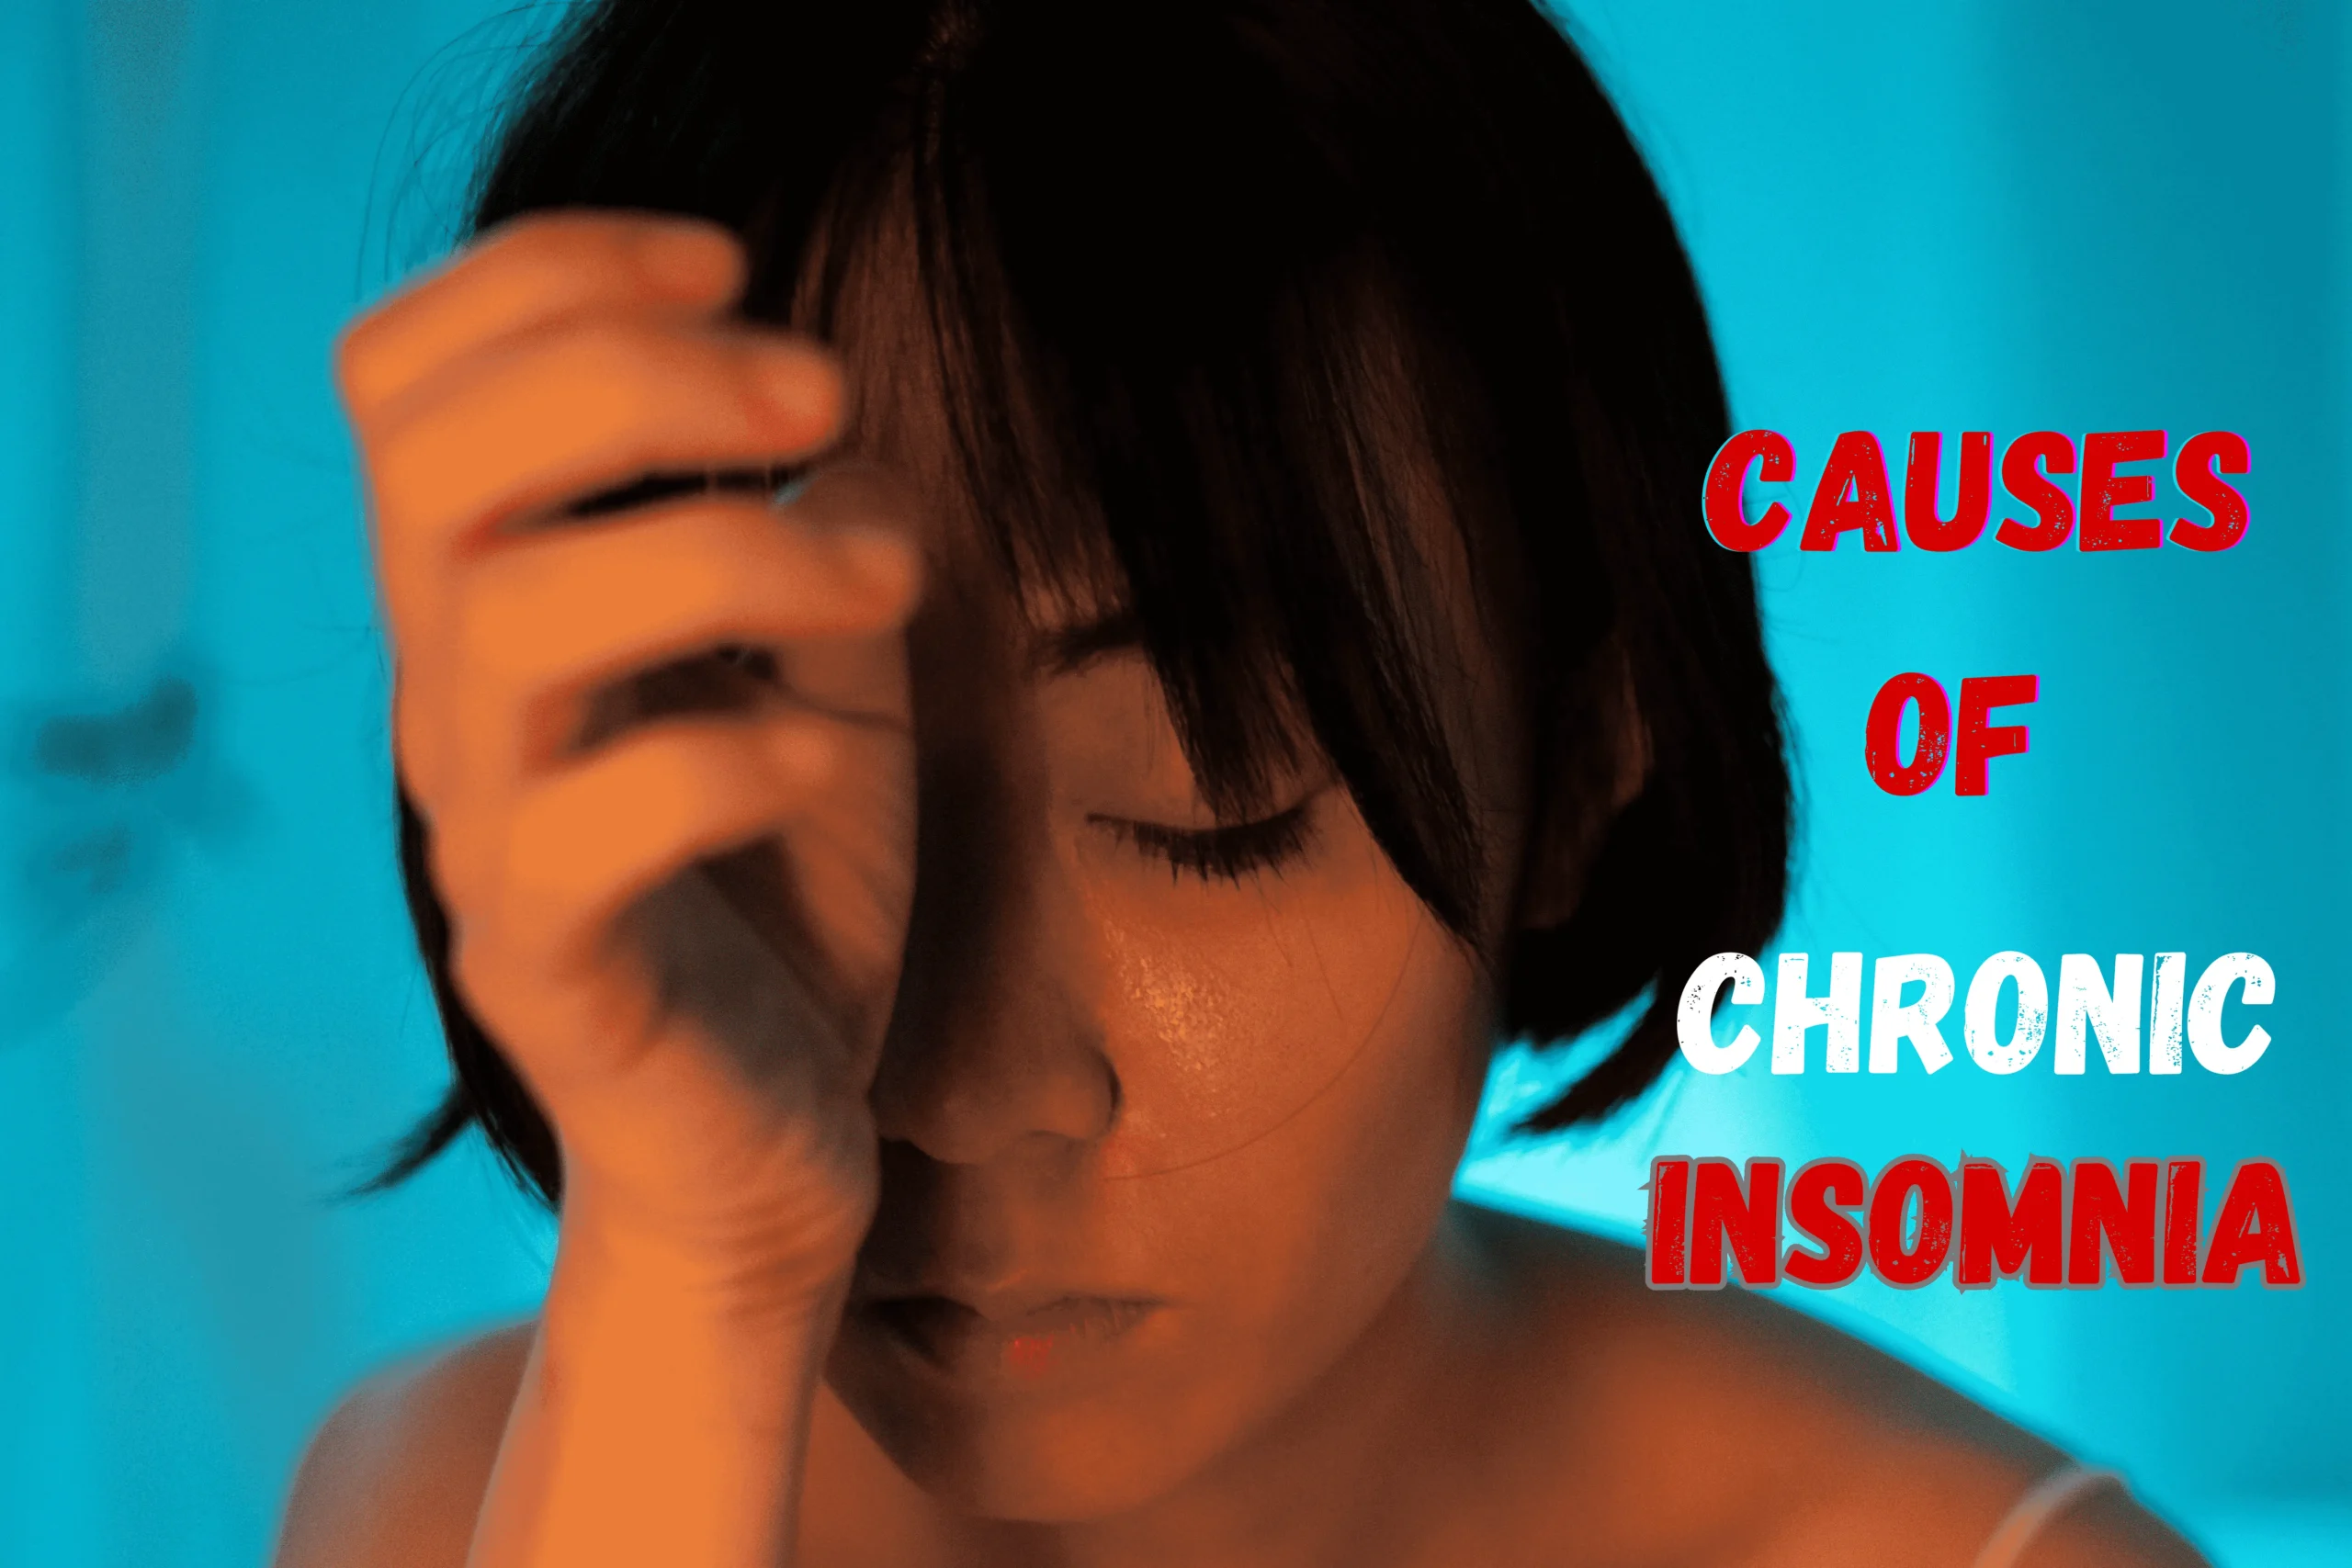 Can Chronic Insomnia Cause Serious Health Problems?